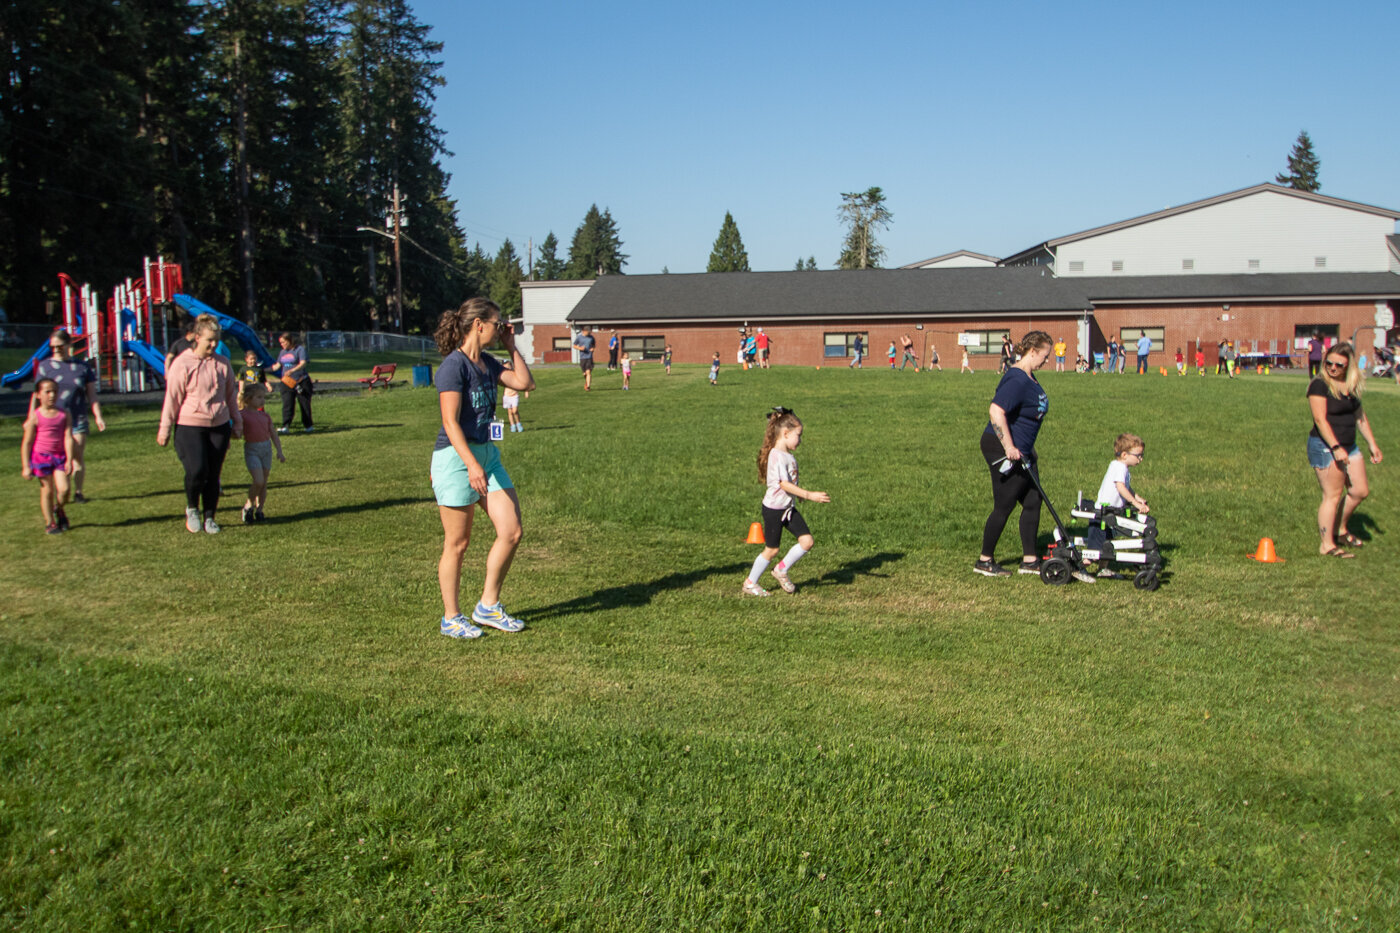 Parkside Elementary School students, their teachers and parents participate in the school's annual Jog-A-Thon fundraising event Friday morning in Tenino.